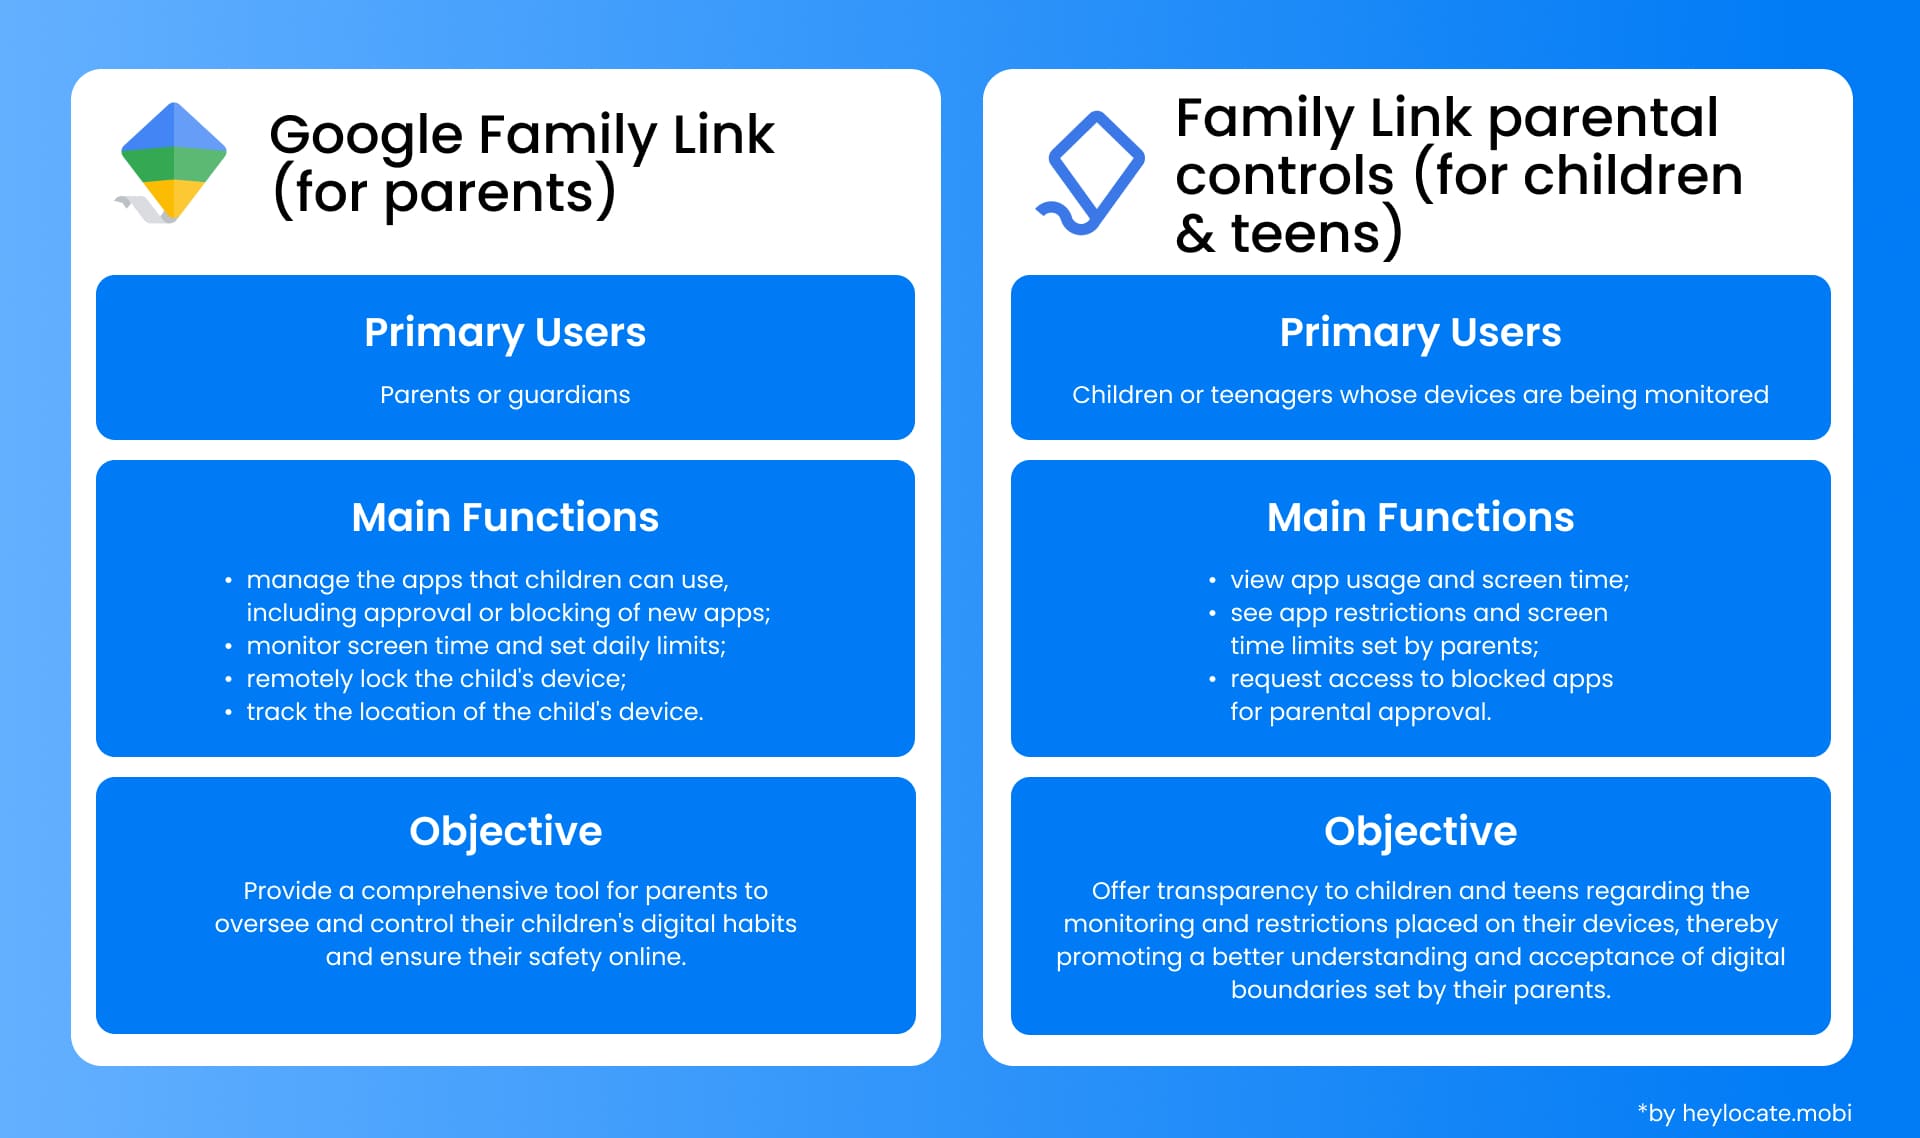 An infographic comparing features of Google Family Link for parents and Family Link parental controls for children and teens, including user categories and main functions